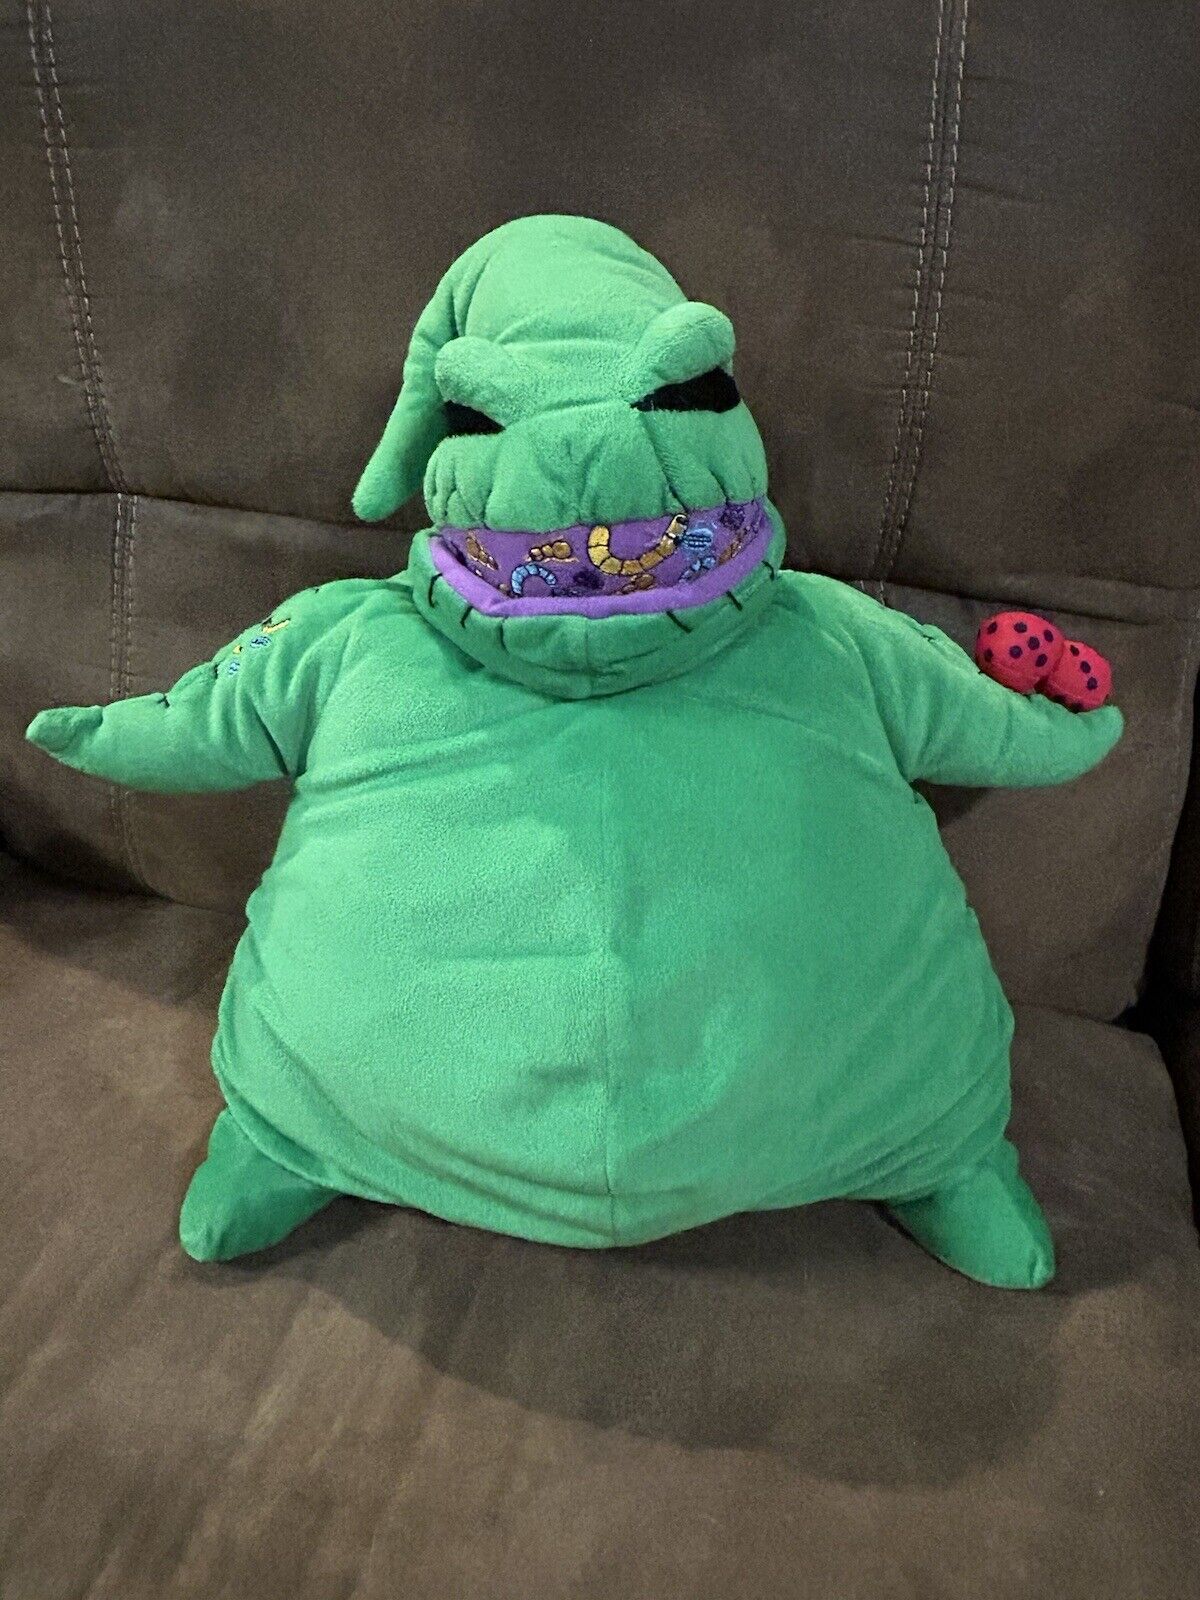 17” Oogie Boogie Plush, The Nightmare Before Christmas